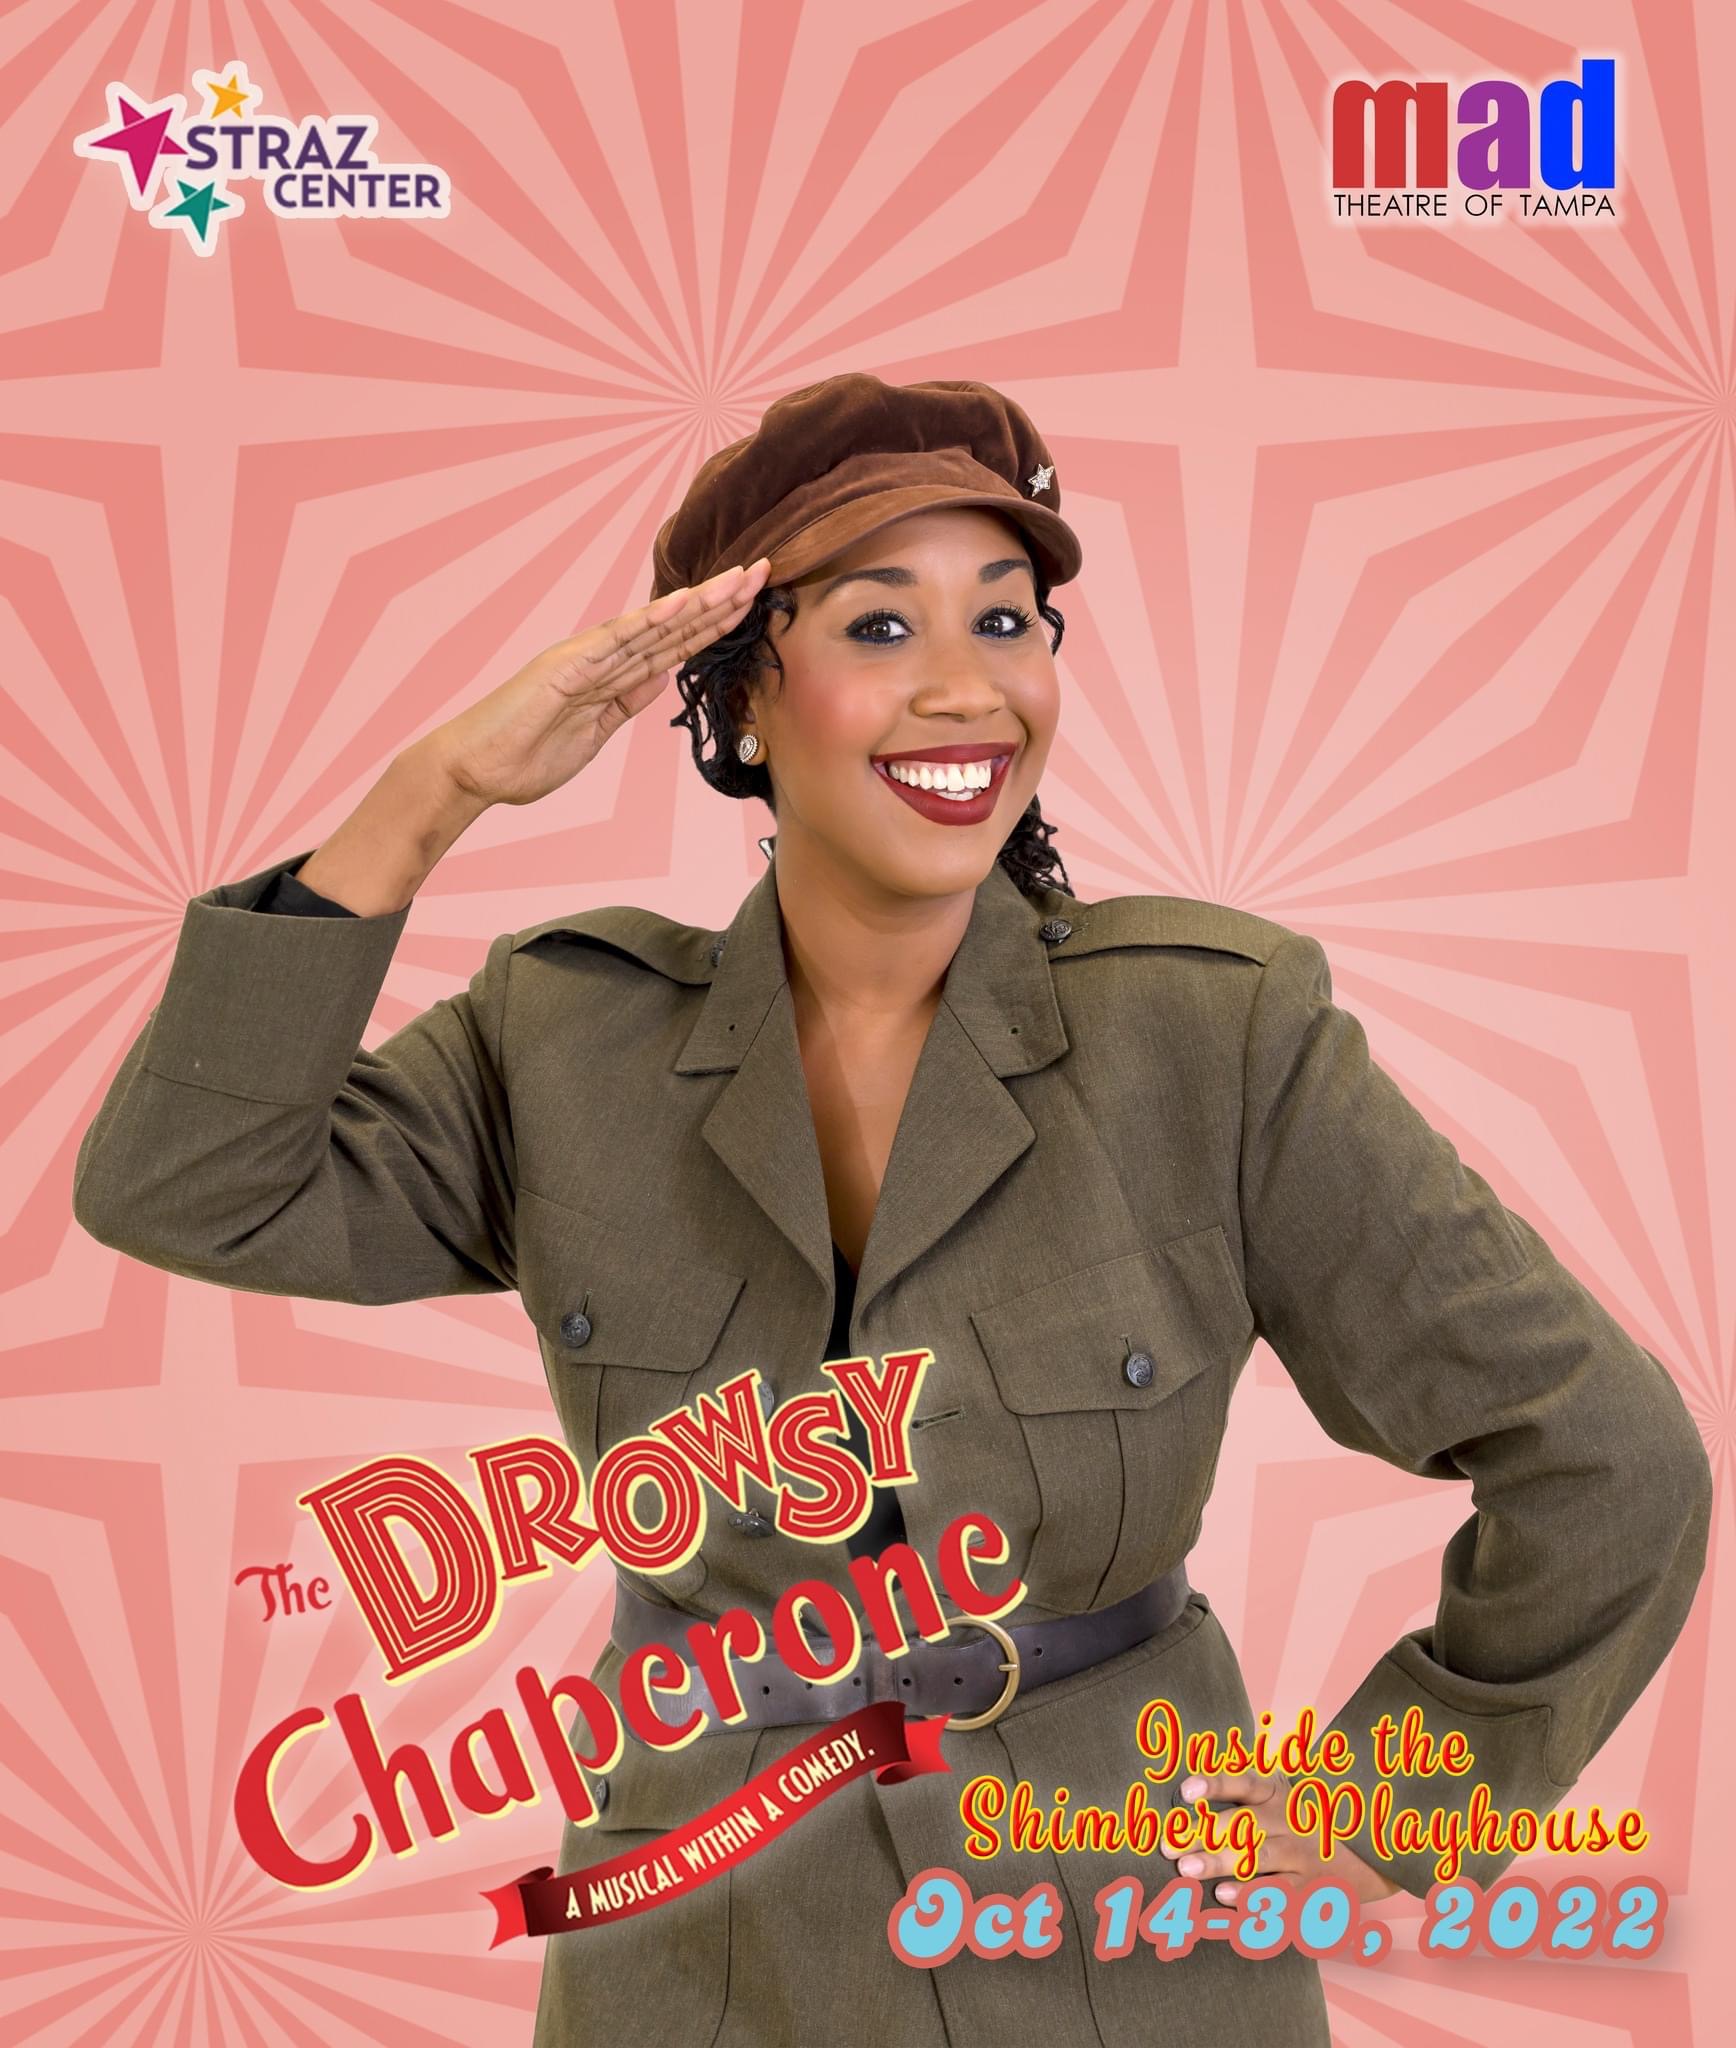 Meet Trix as played by Patty Smithey in mad Theatre of Tampa’s “The Drowsy Chaperone